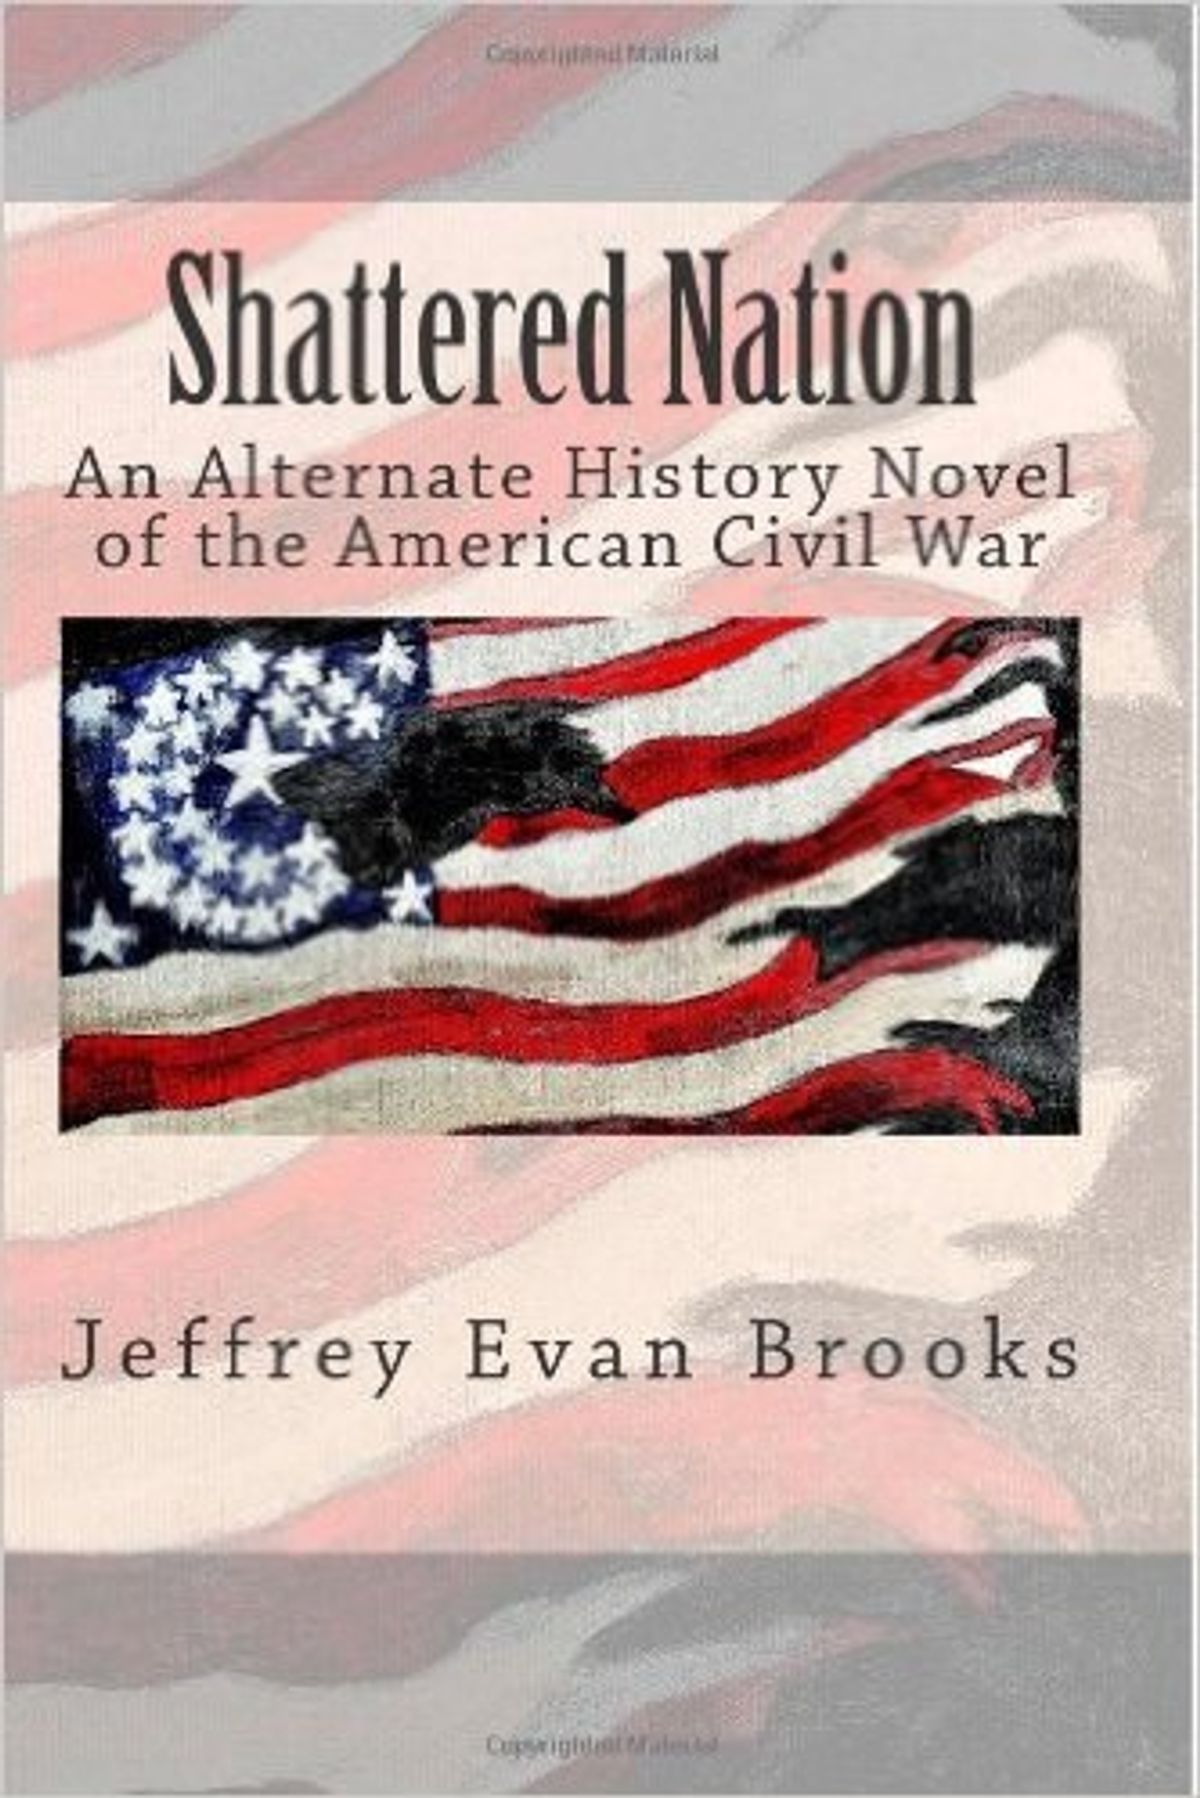 An Interview With Jeffrey Evan Brooks, Author Of 'Shattered Nation'